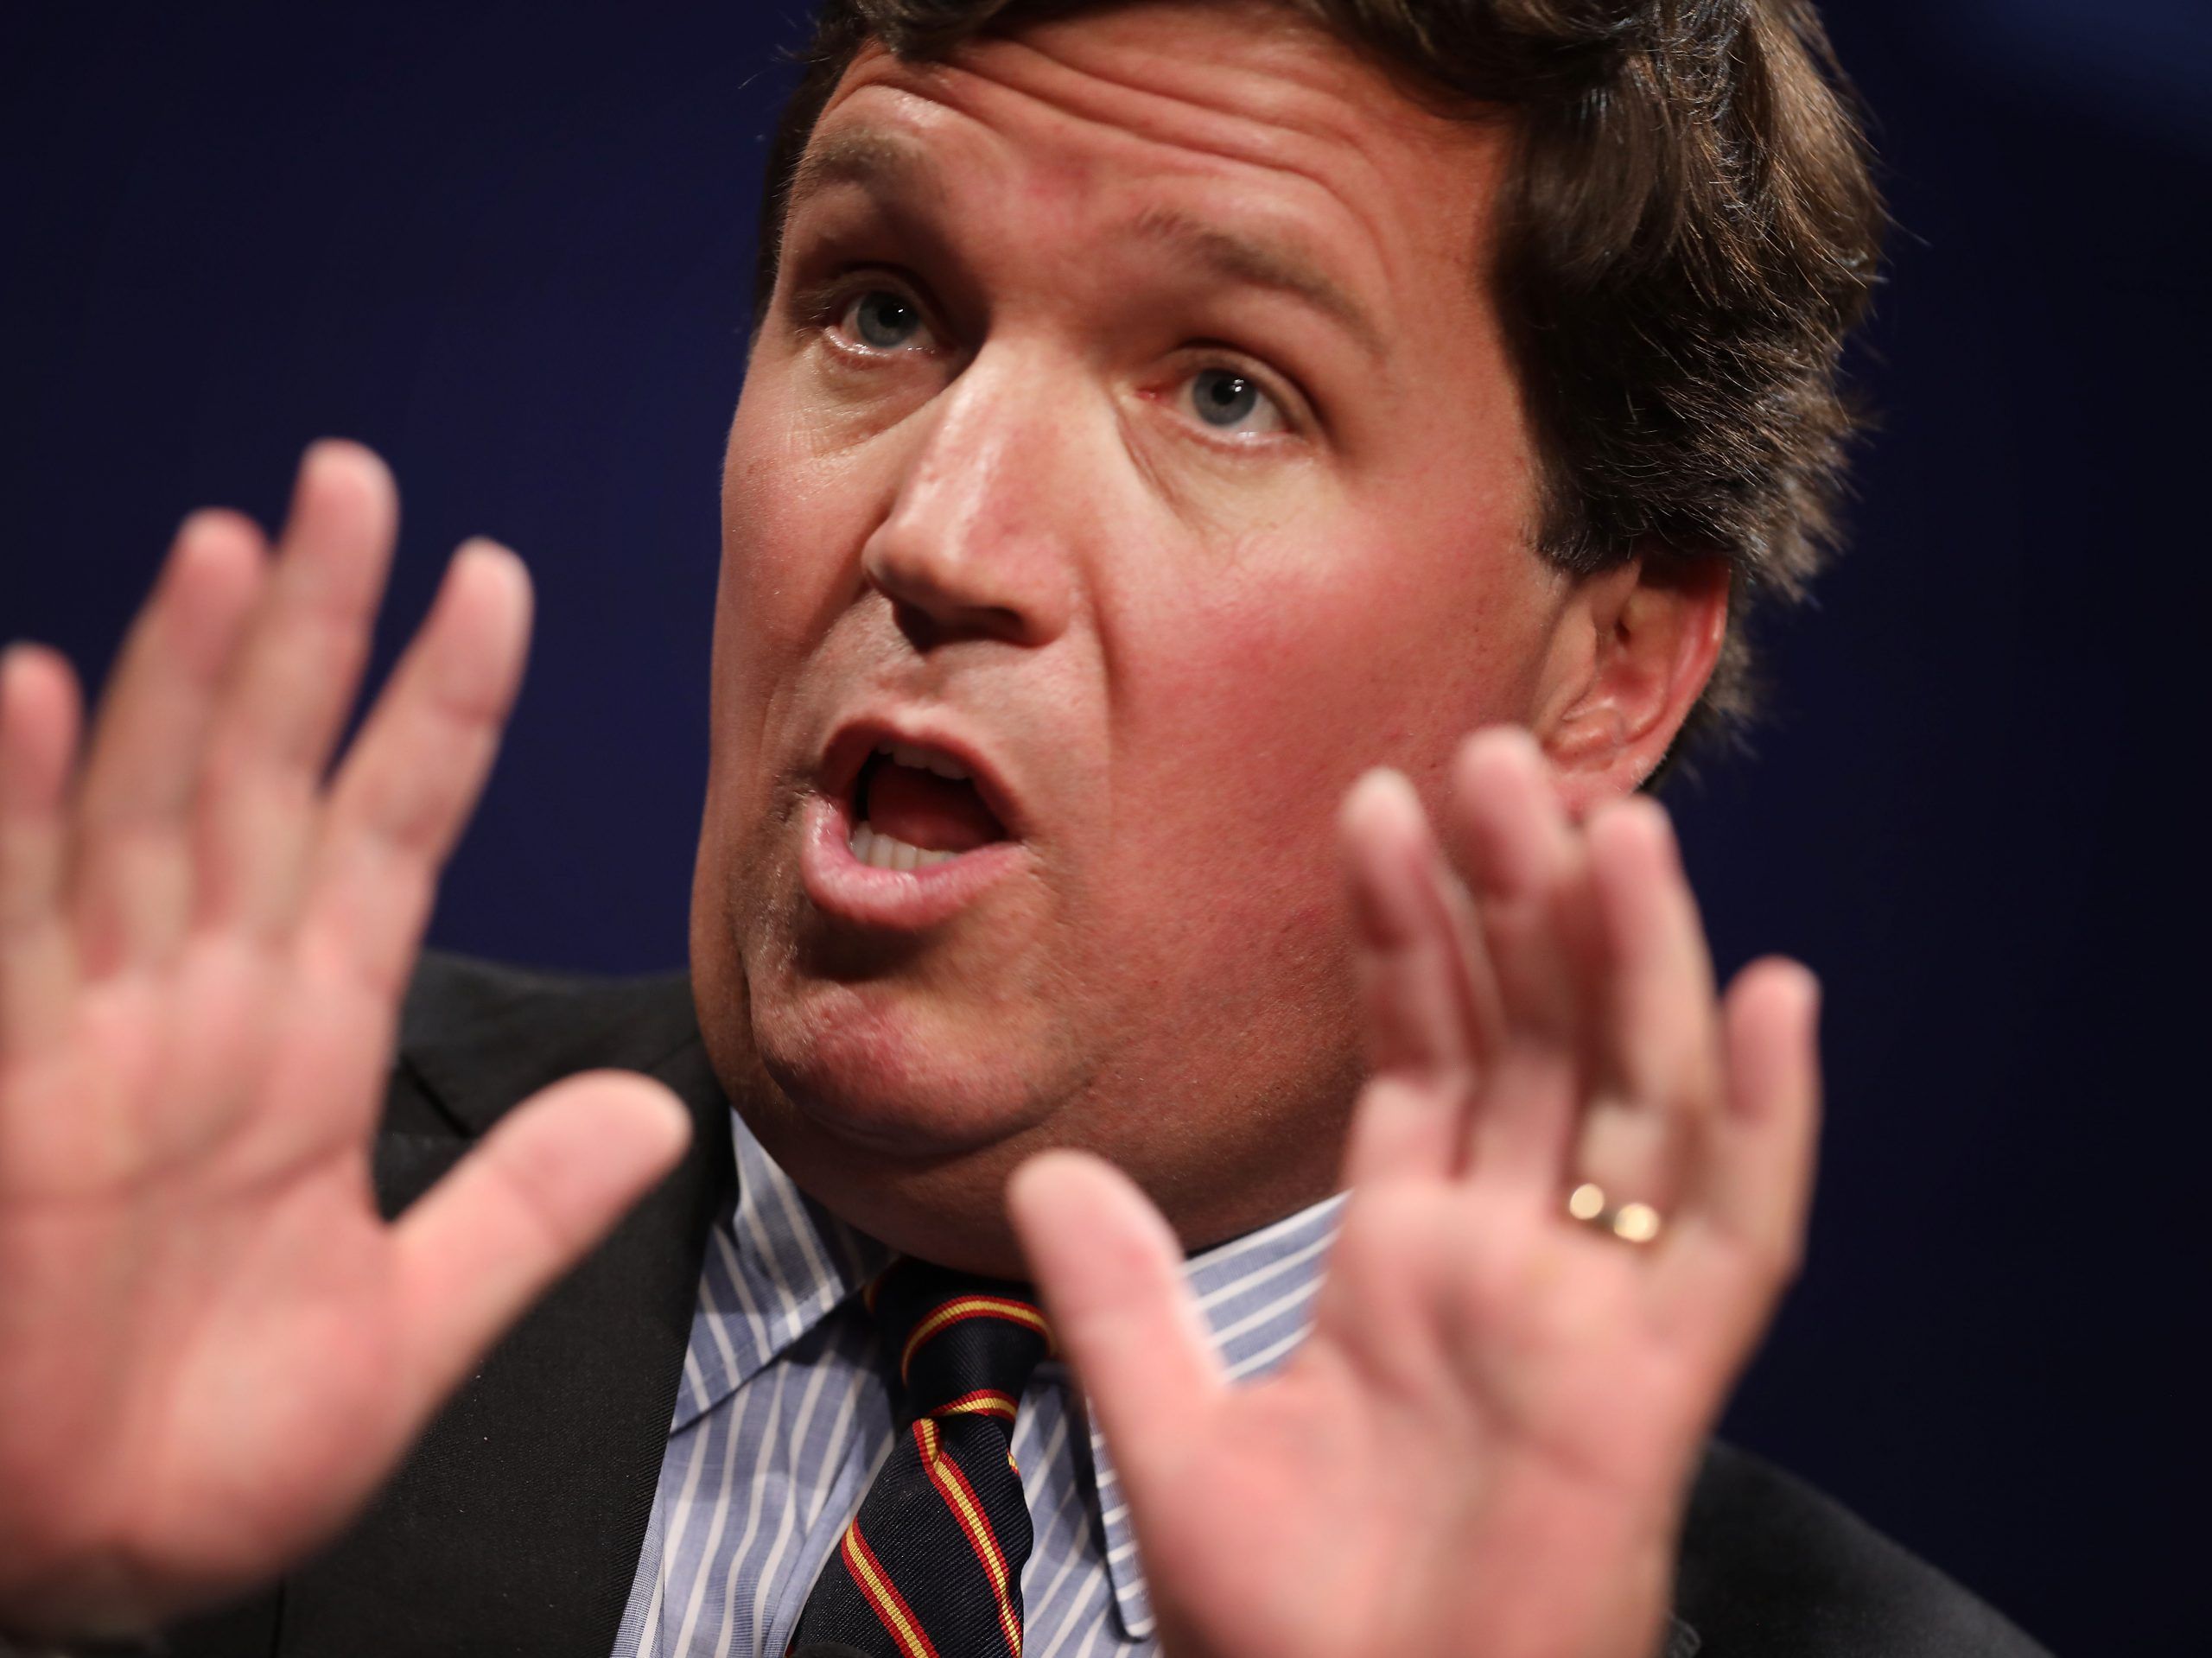 Cohen Tucker Carlson rages, while Canada focuses on public safety Montreal Gazette